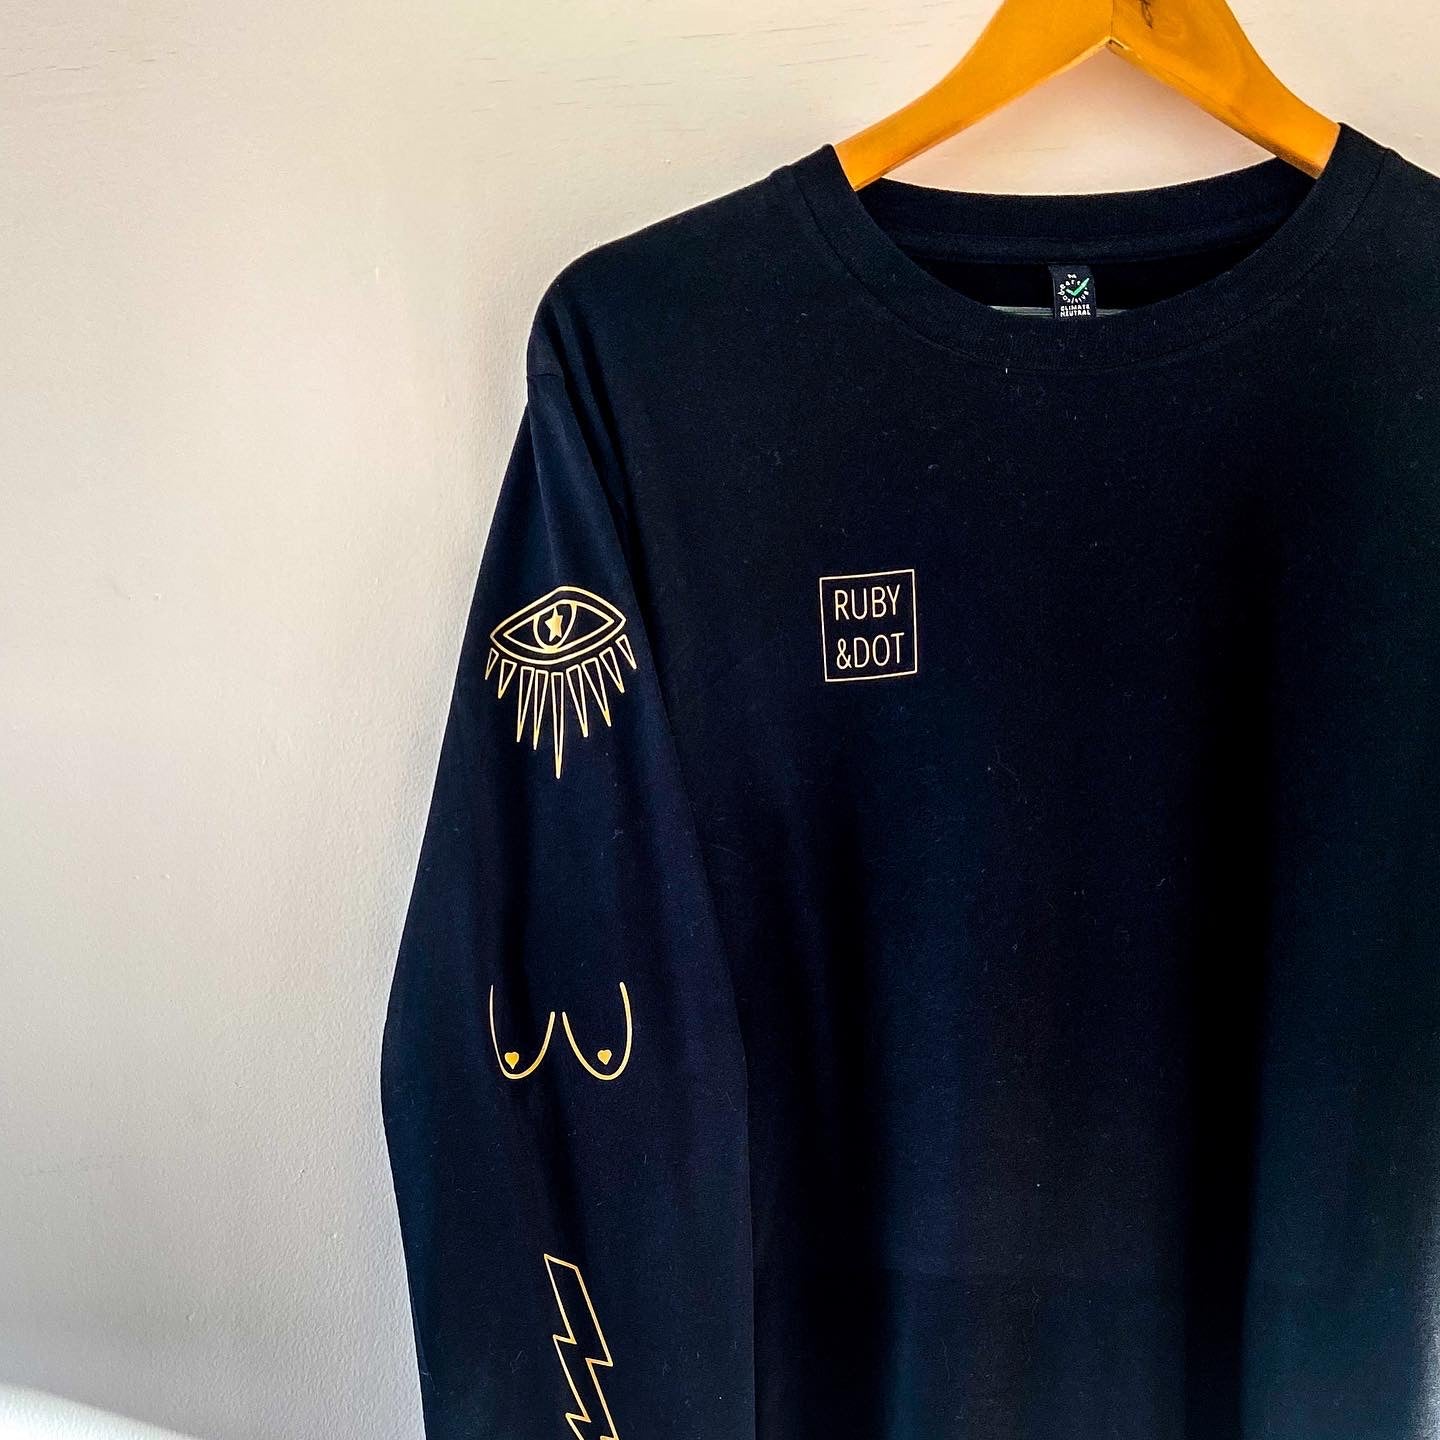 Black long Sleeve top with sleeve design.